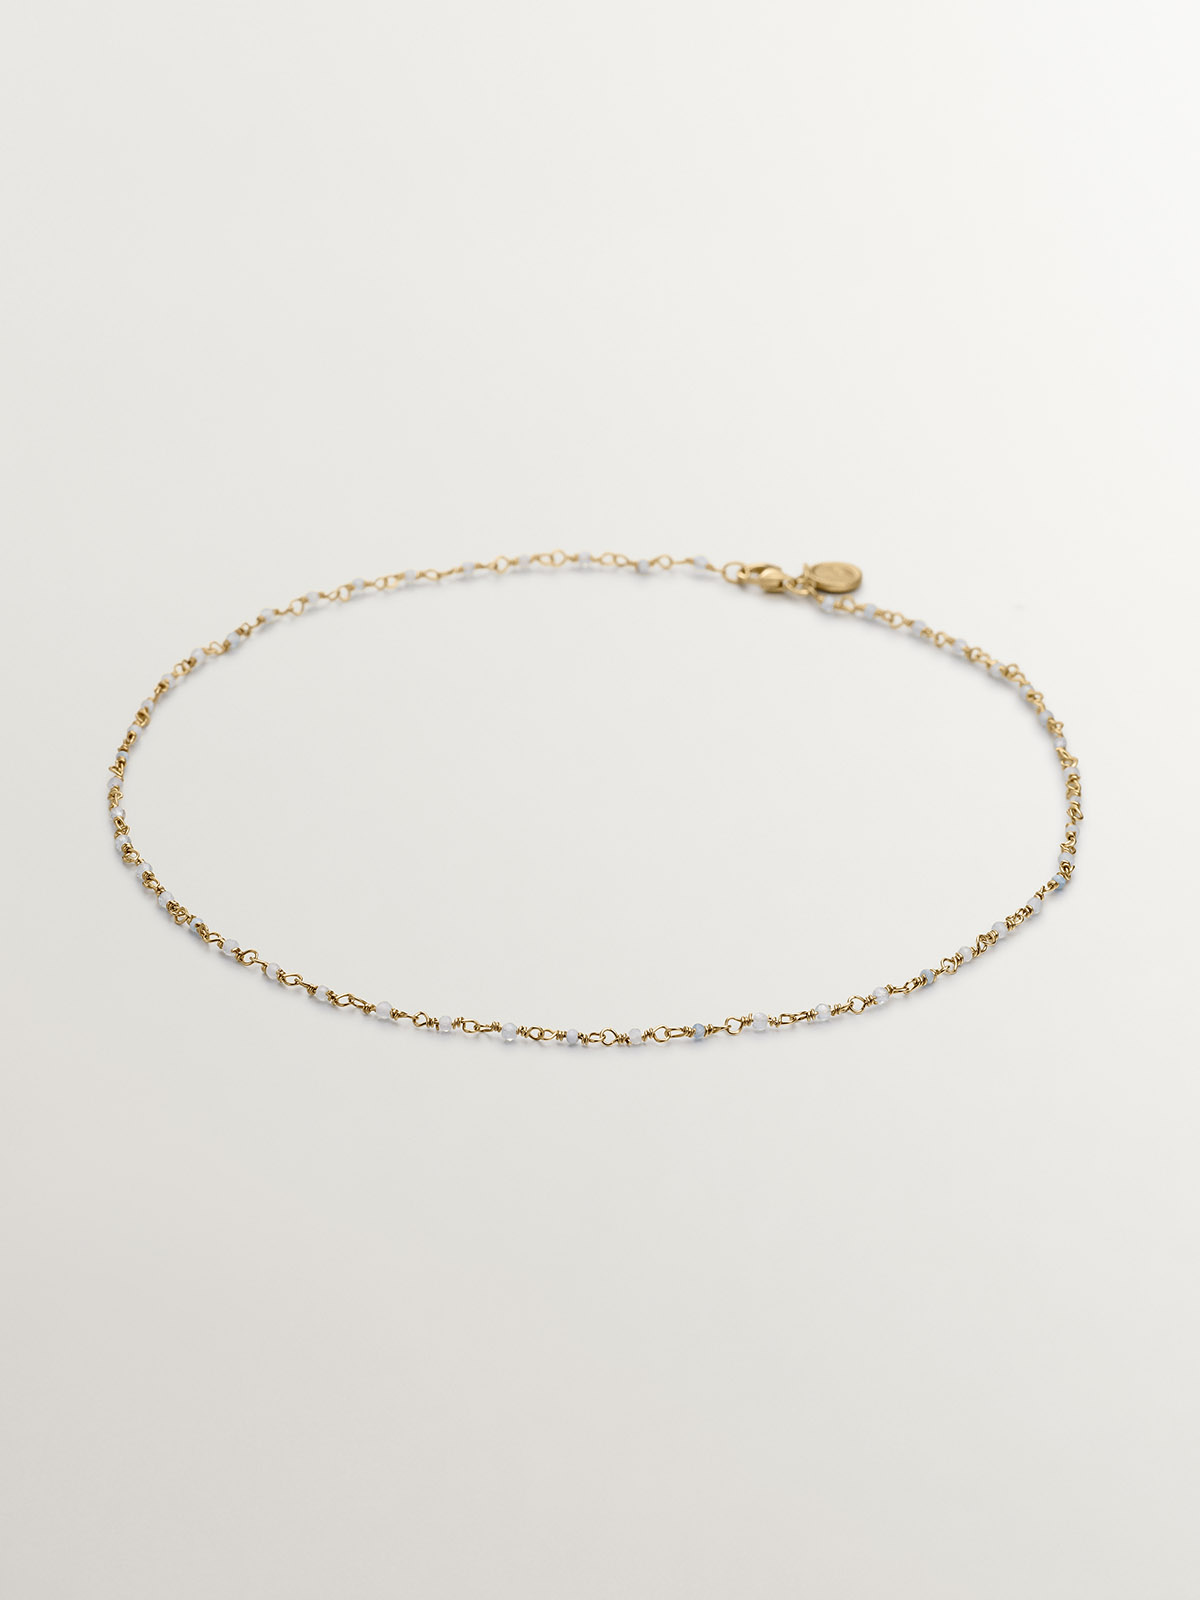 925 Silver chain bathed in 18K yellow gold with aquamarine beads